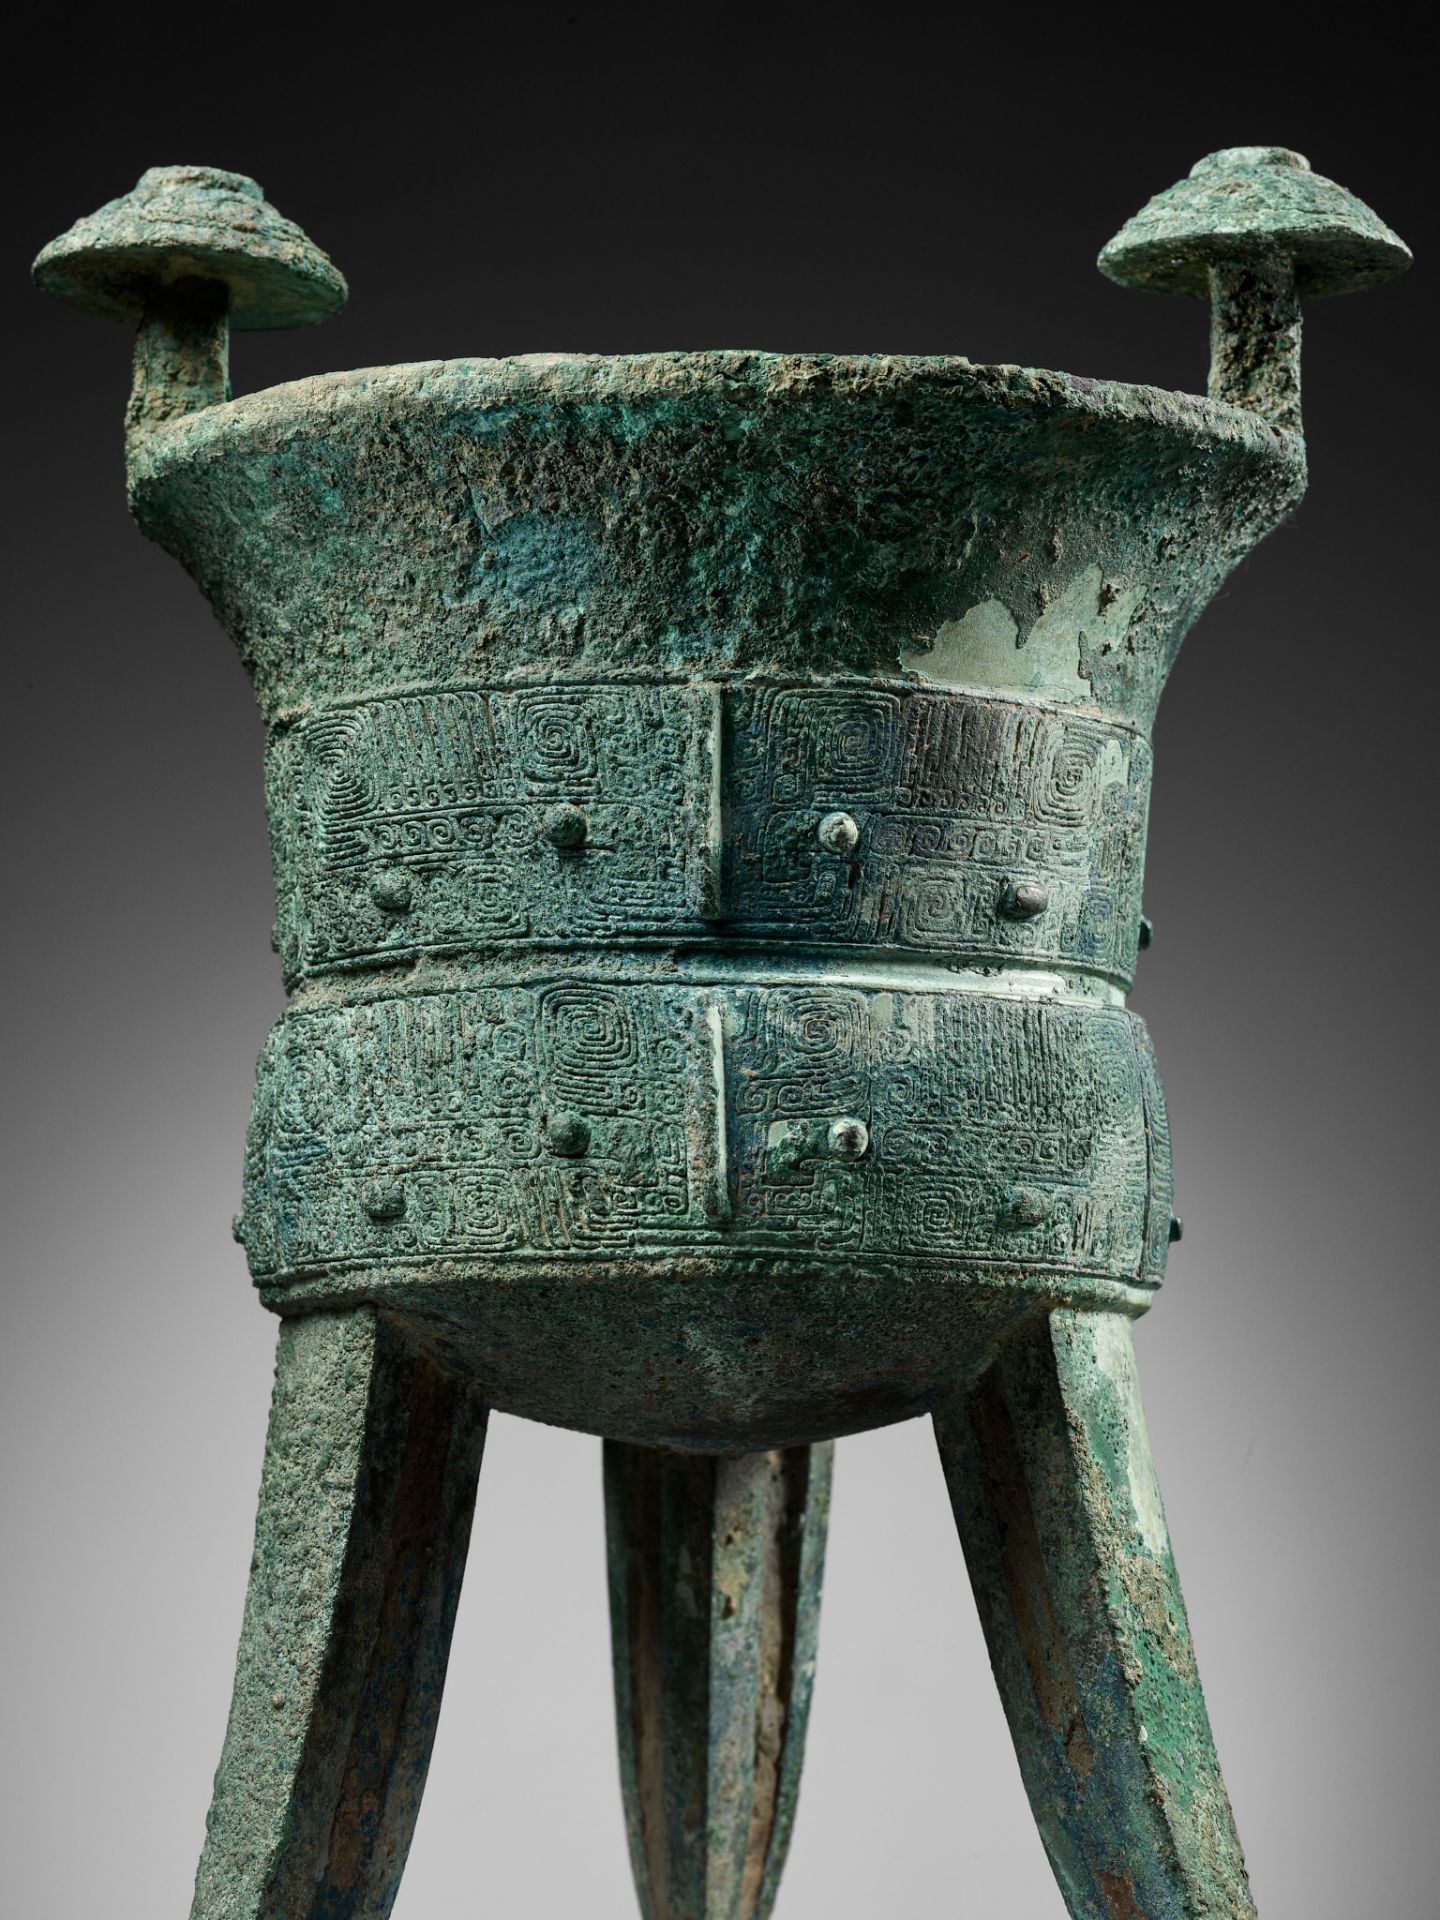 AN EXCEPTIONALLY LARGE AND MASSIVE BRONZE RITUAL TRIPOD WINE VESSEL, JIA, WITH A CLAN MARK, SHANG - Image 29 of 29